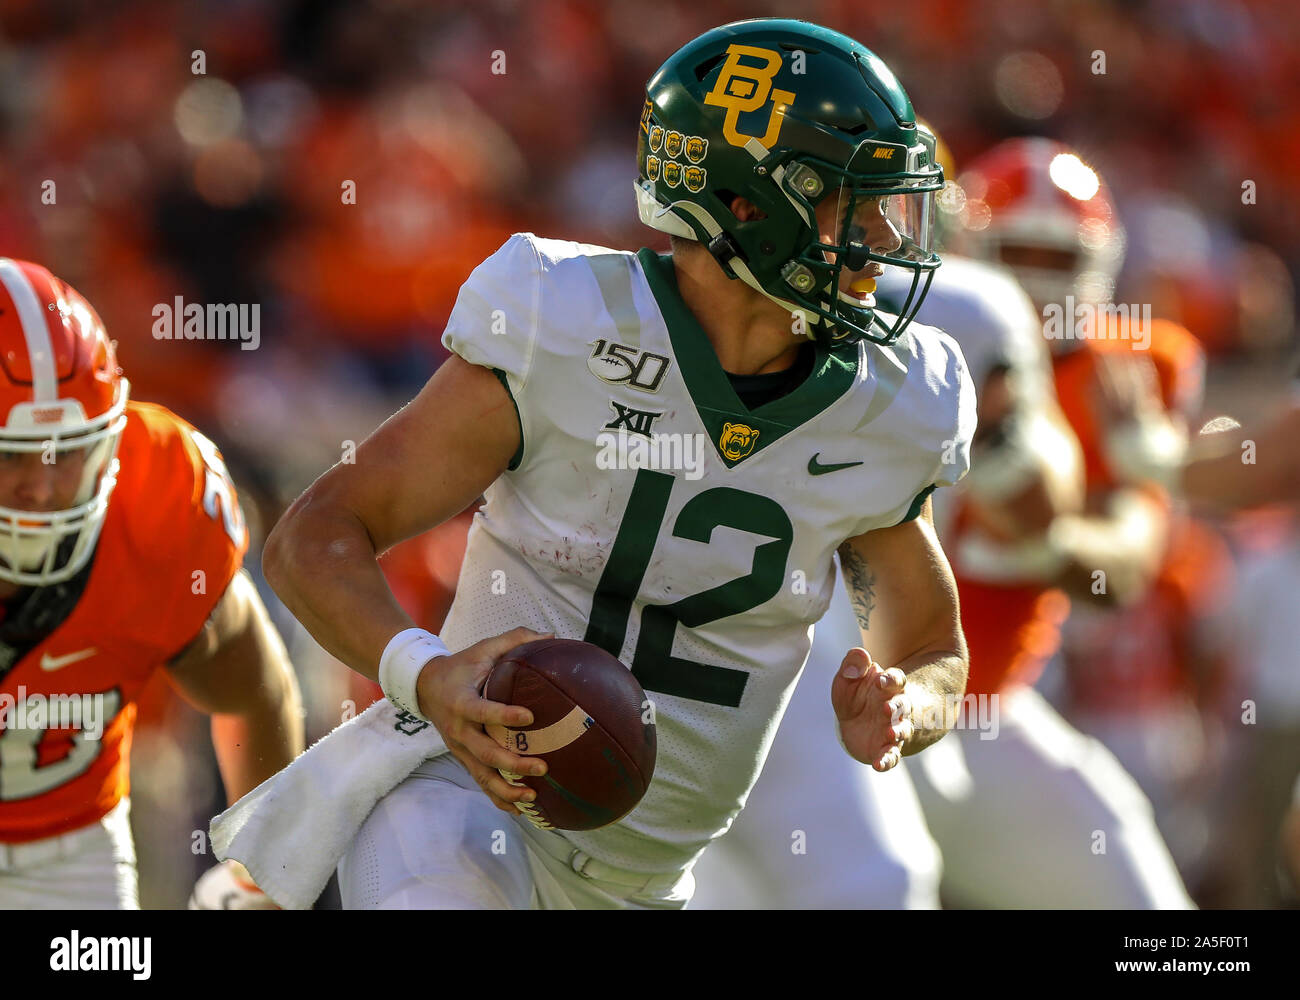 October 19, 2019: Baylor University quarterback Charlie Brewer (12) during a football game between the Baylor University Bears and the Oklahoma State Cowboys at Boone Pickens Stadium in Stillwater, OK. Gray Siegel/CSM Stock Photo